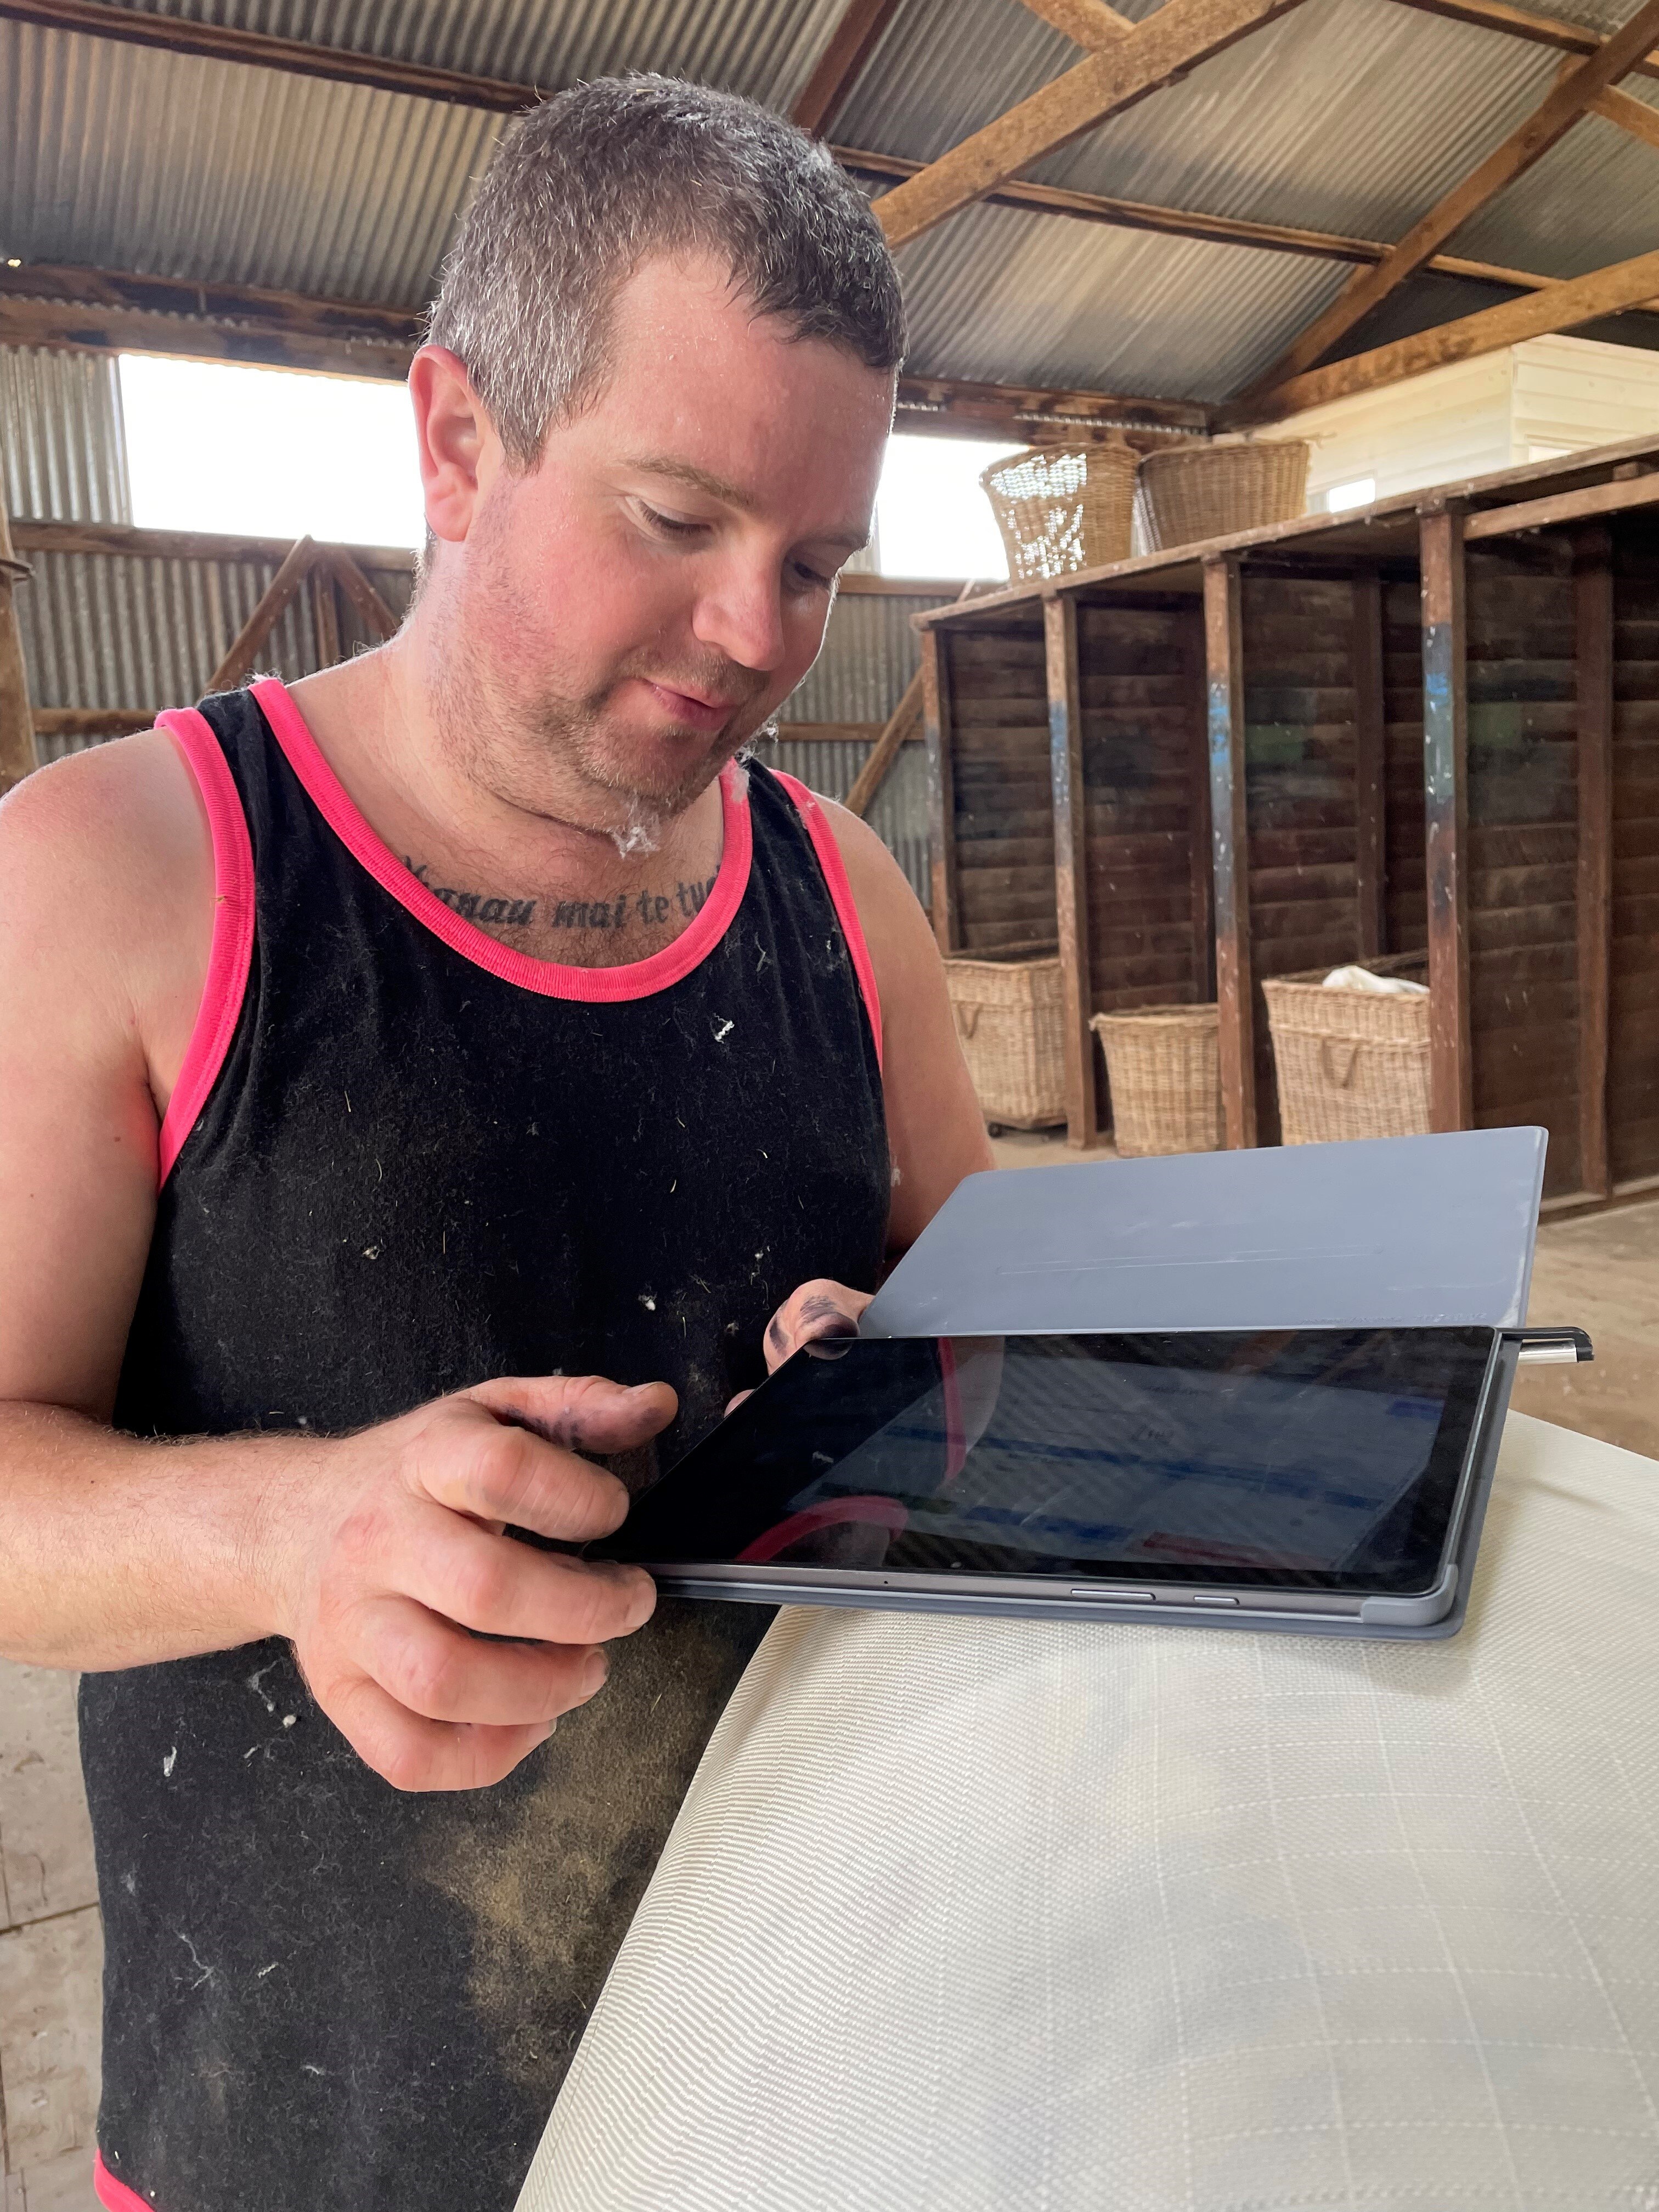 A man in a singlet uses an iPad on top of a wool bale in a shearing shed 